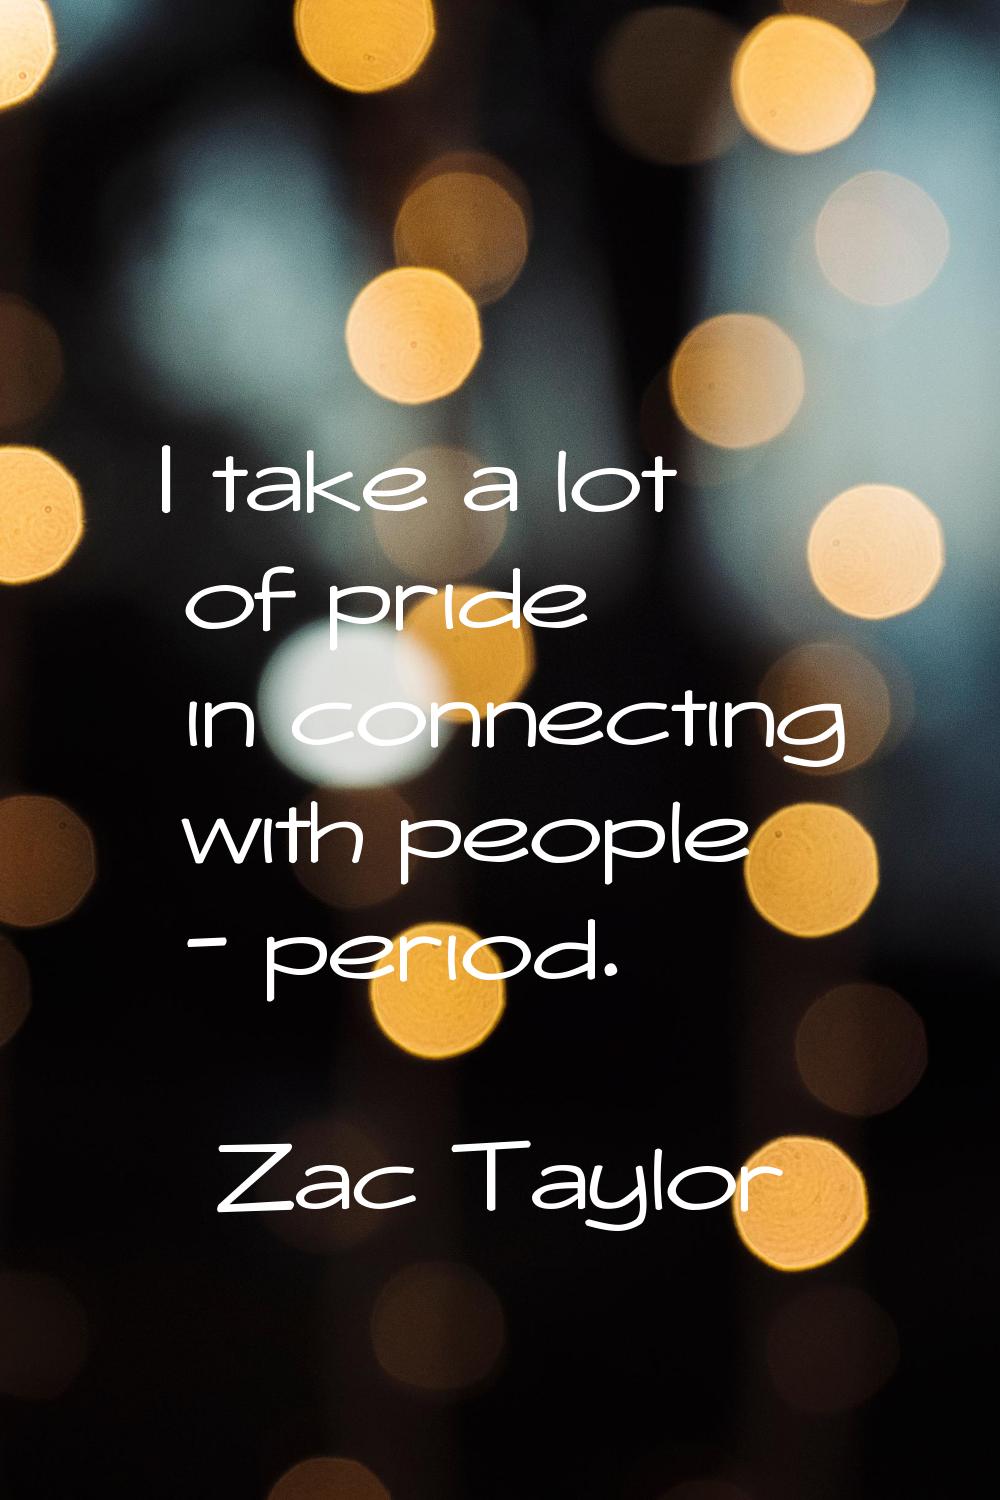 I take a lot of pride in connecting with people - period.